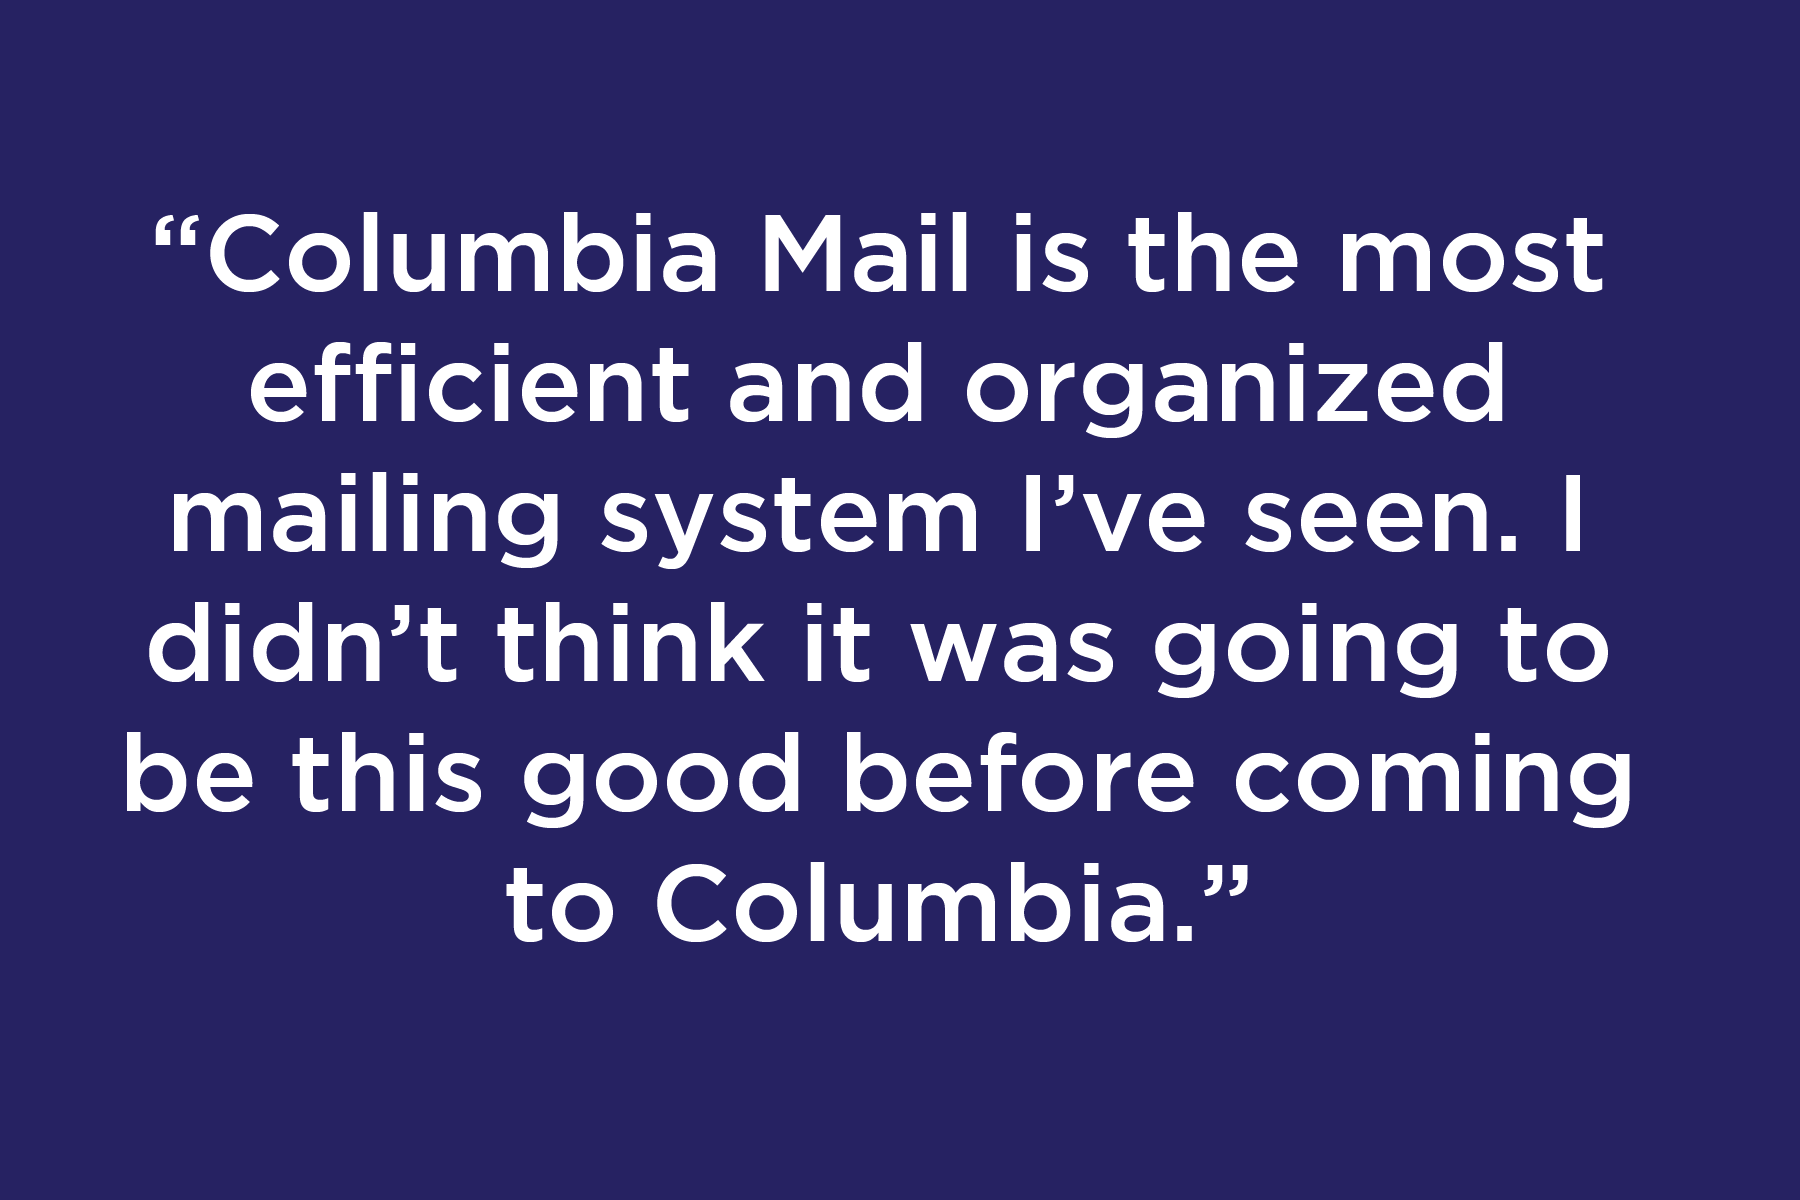 Columbia Mail is the most efficient and organized mailing system I’ve seen. I didn’t think it was going to be this good before coming to Columbia.